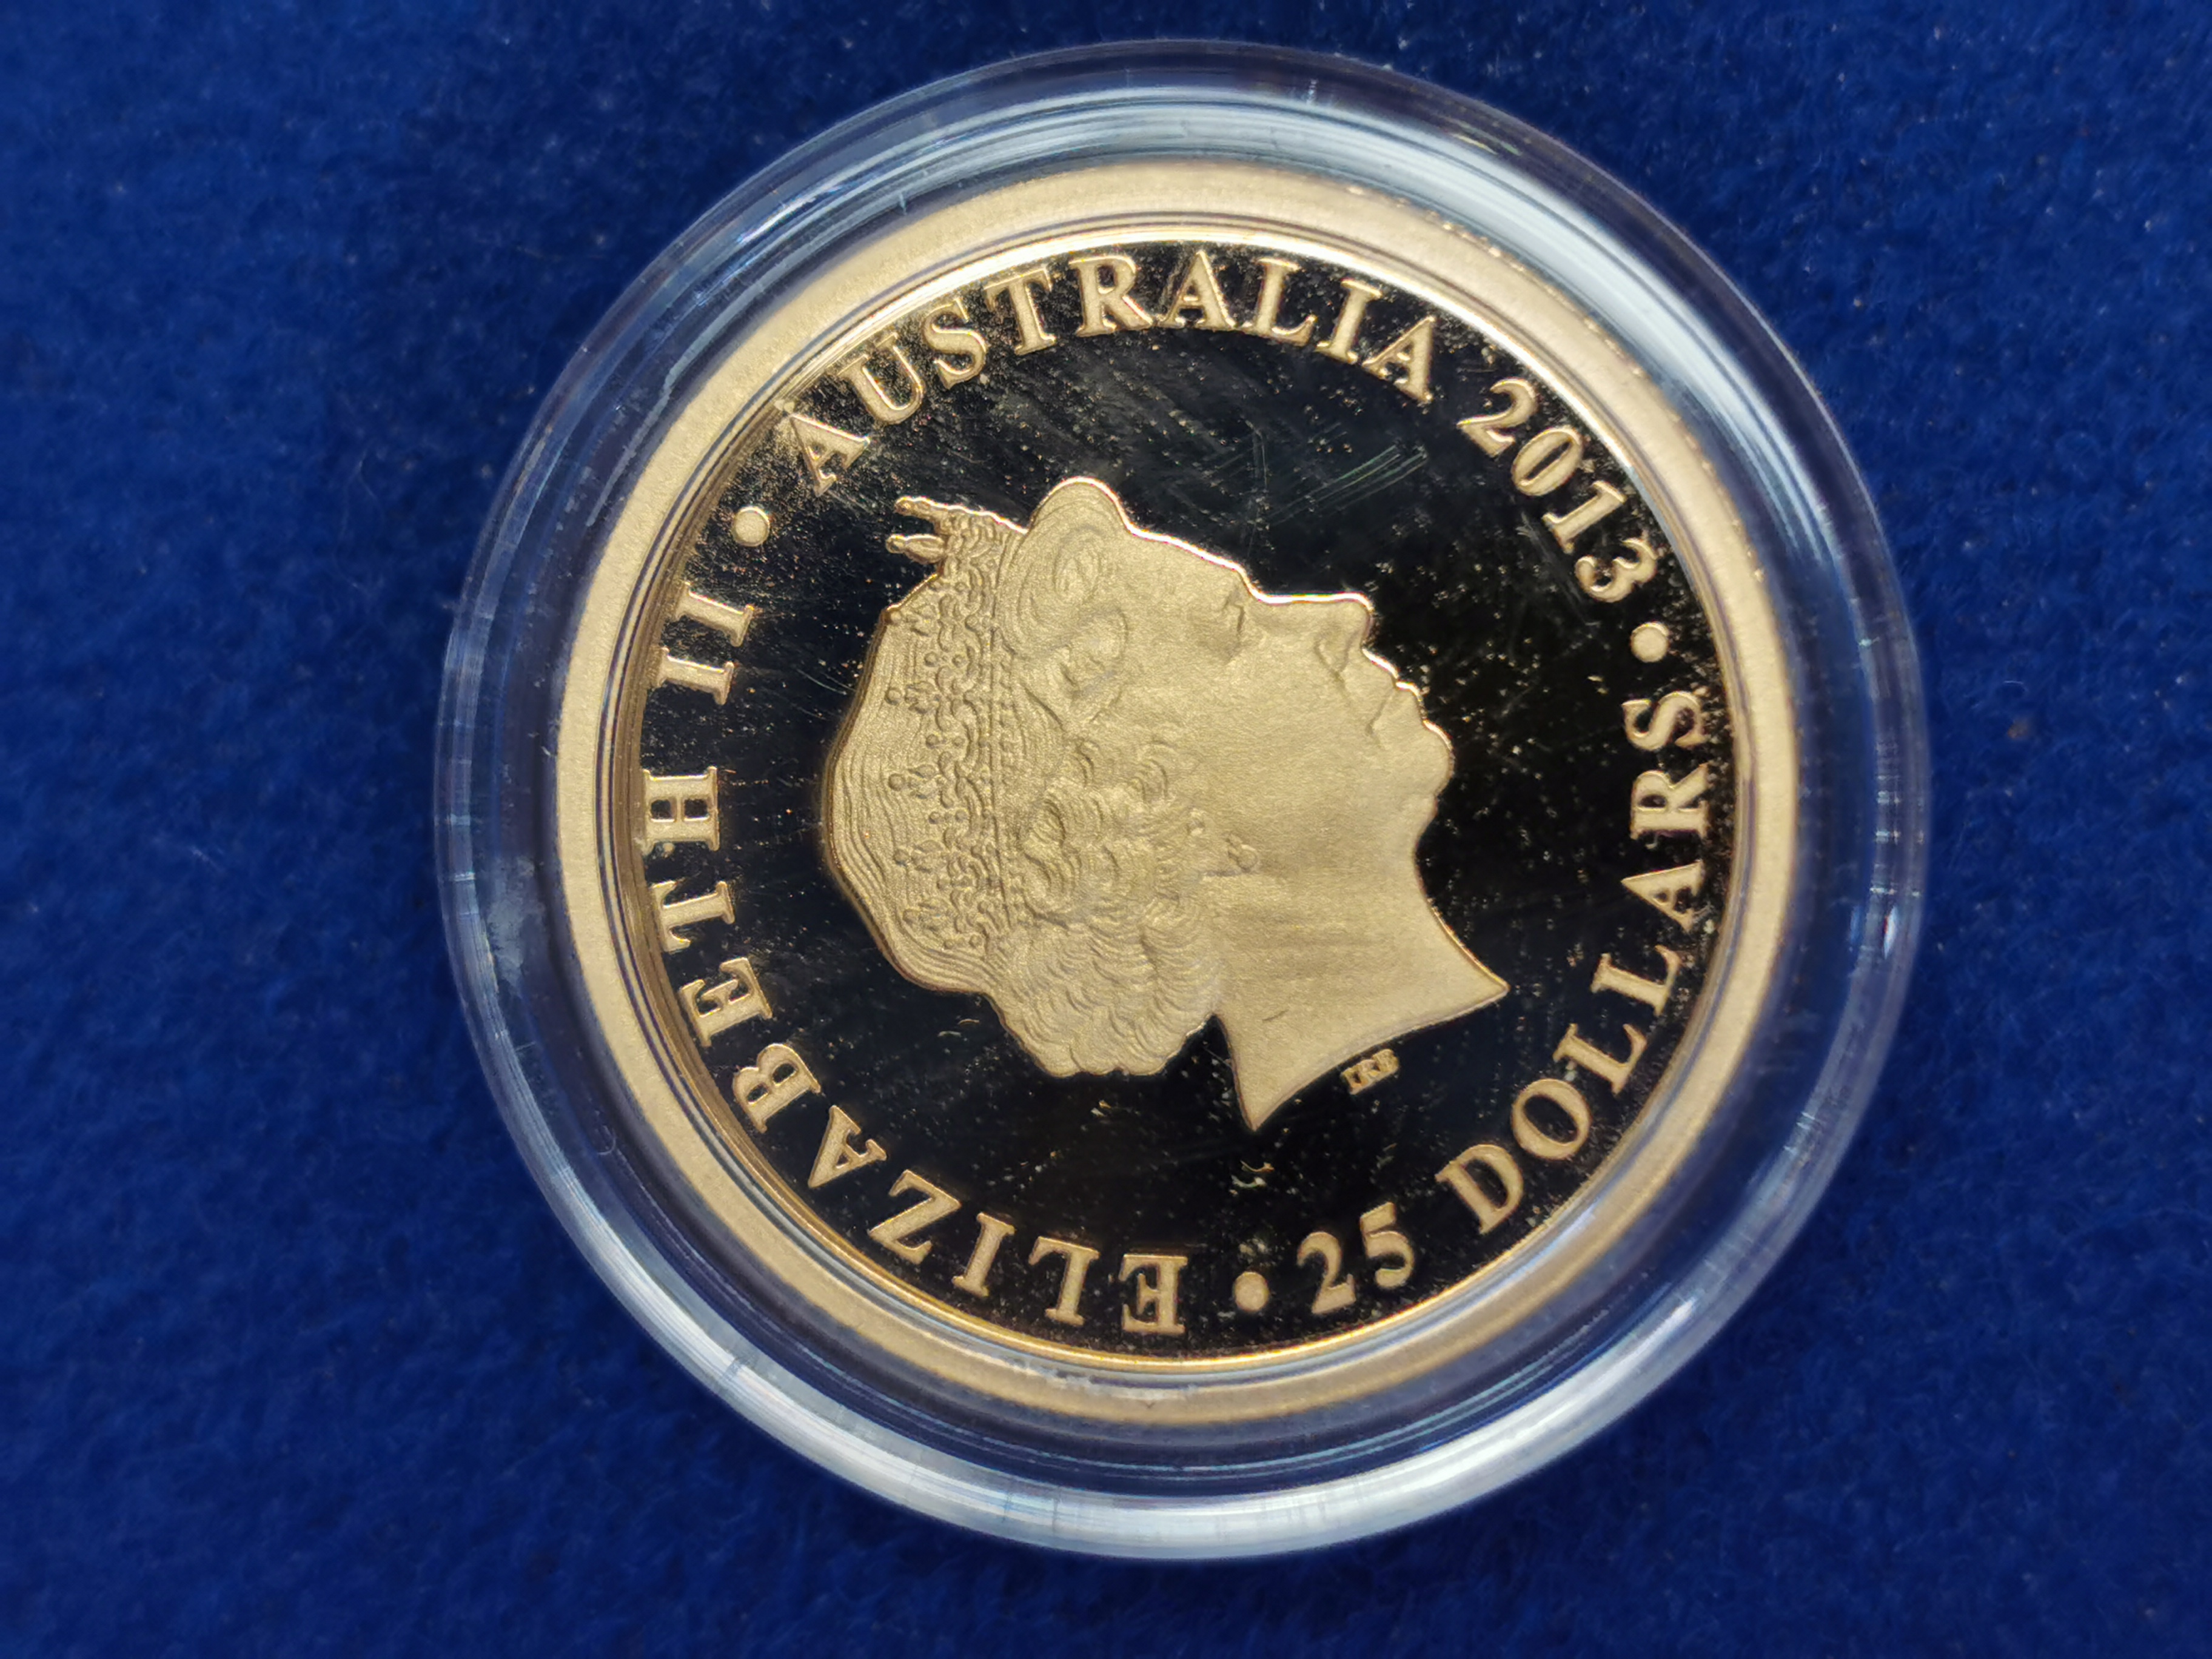 Boxed 25 Dollar Australian Gold Coin - 9g - Image 2 of 3